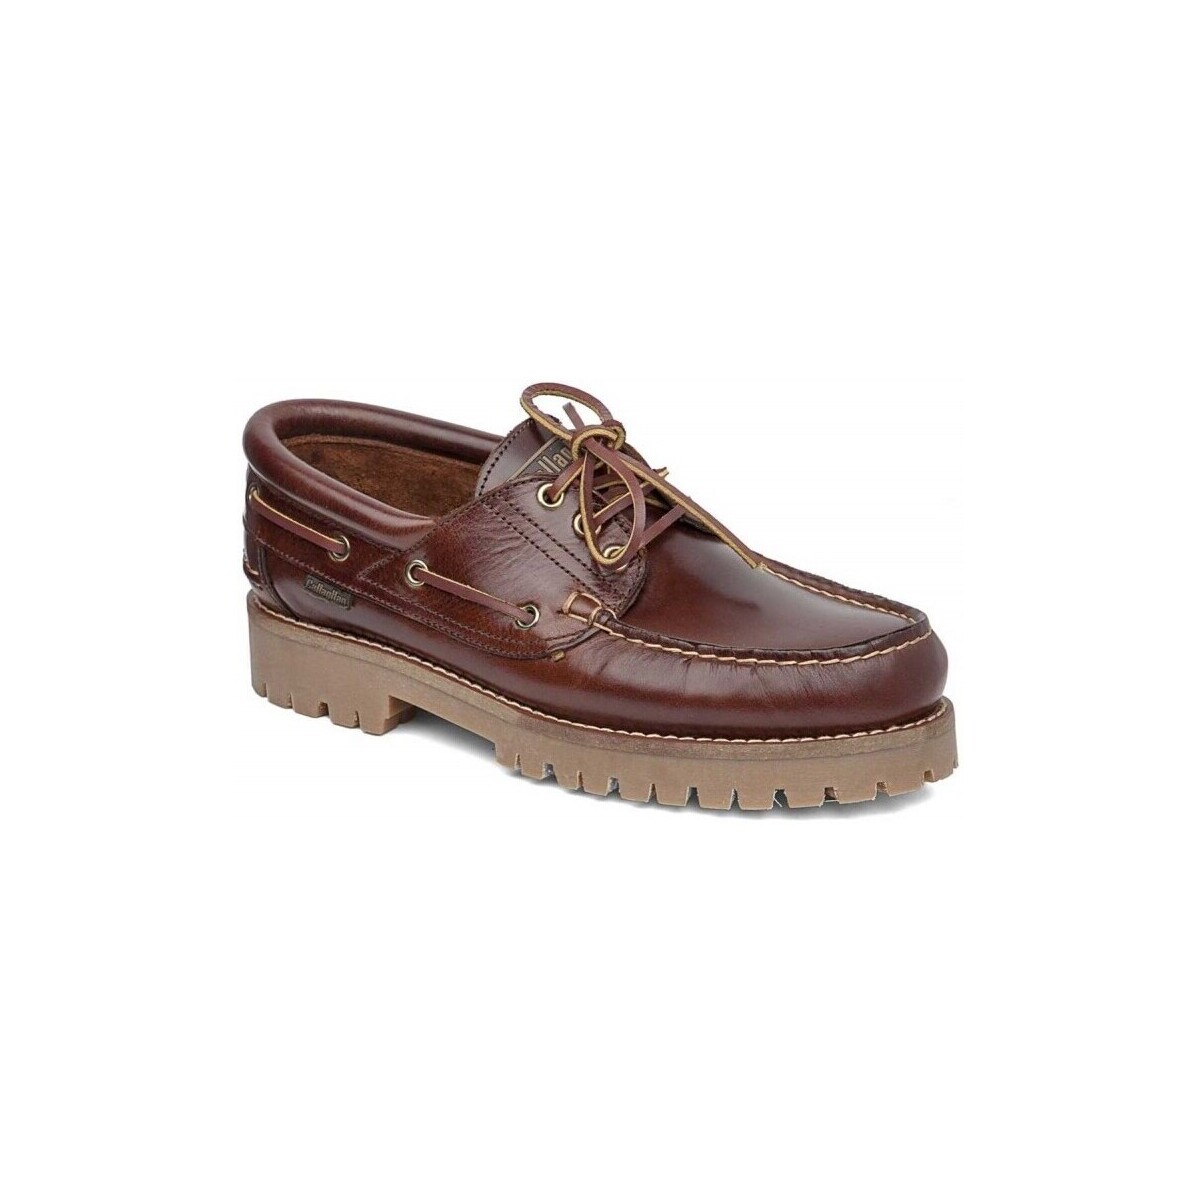 Boat shoes CallagHan 24149-24